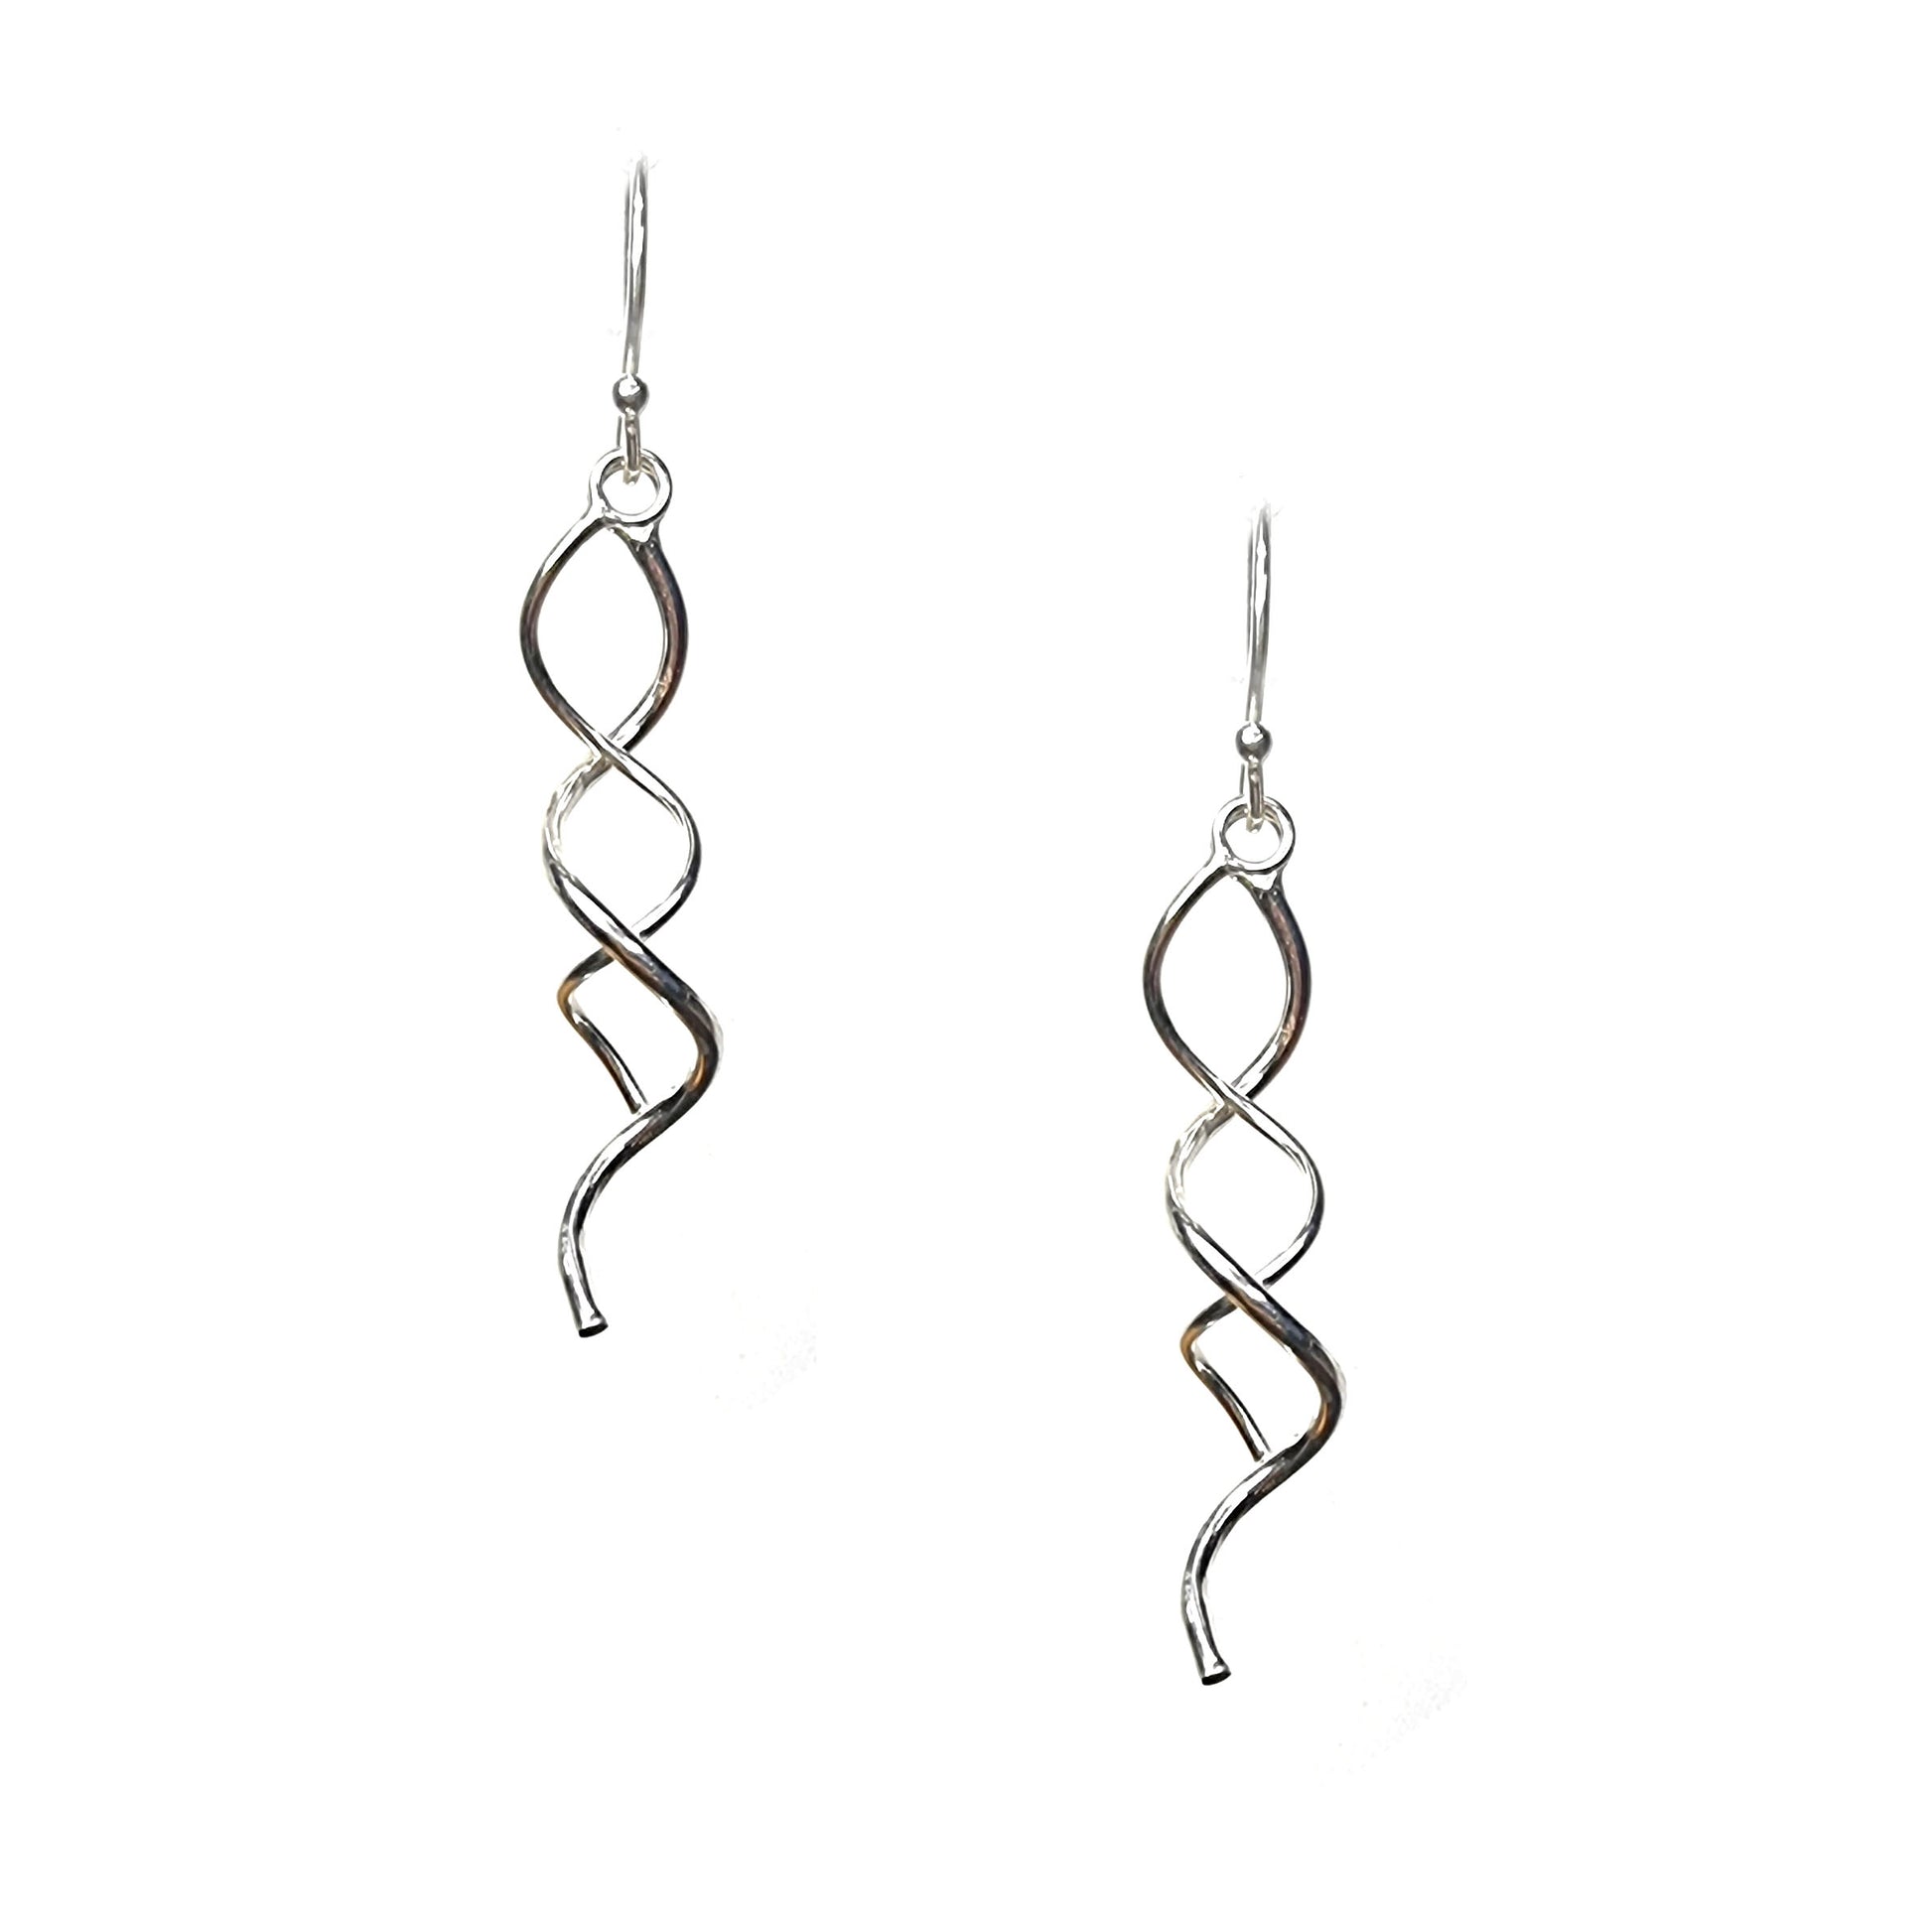 Silver spiral drop earrings featuring 2 curled strands intertwined.